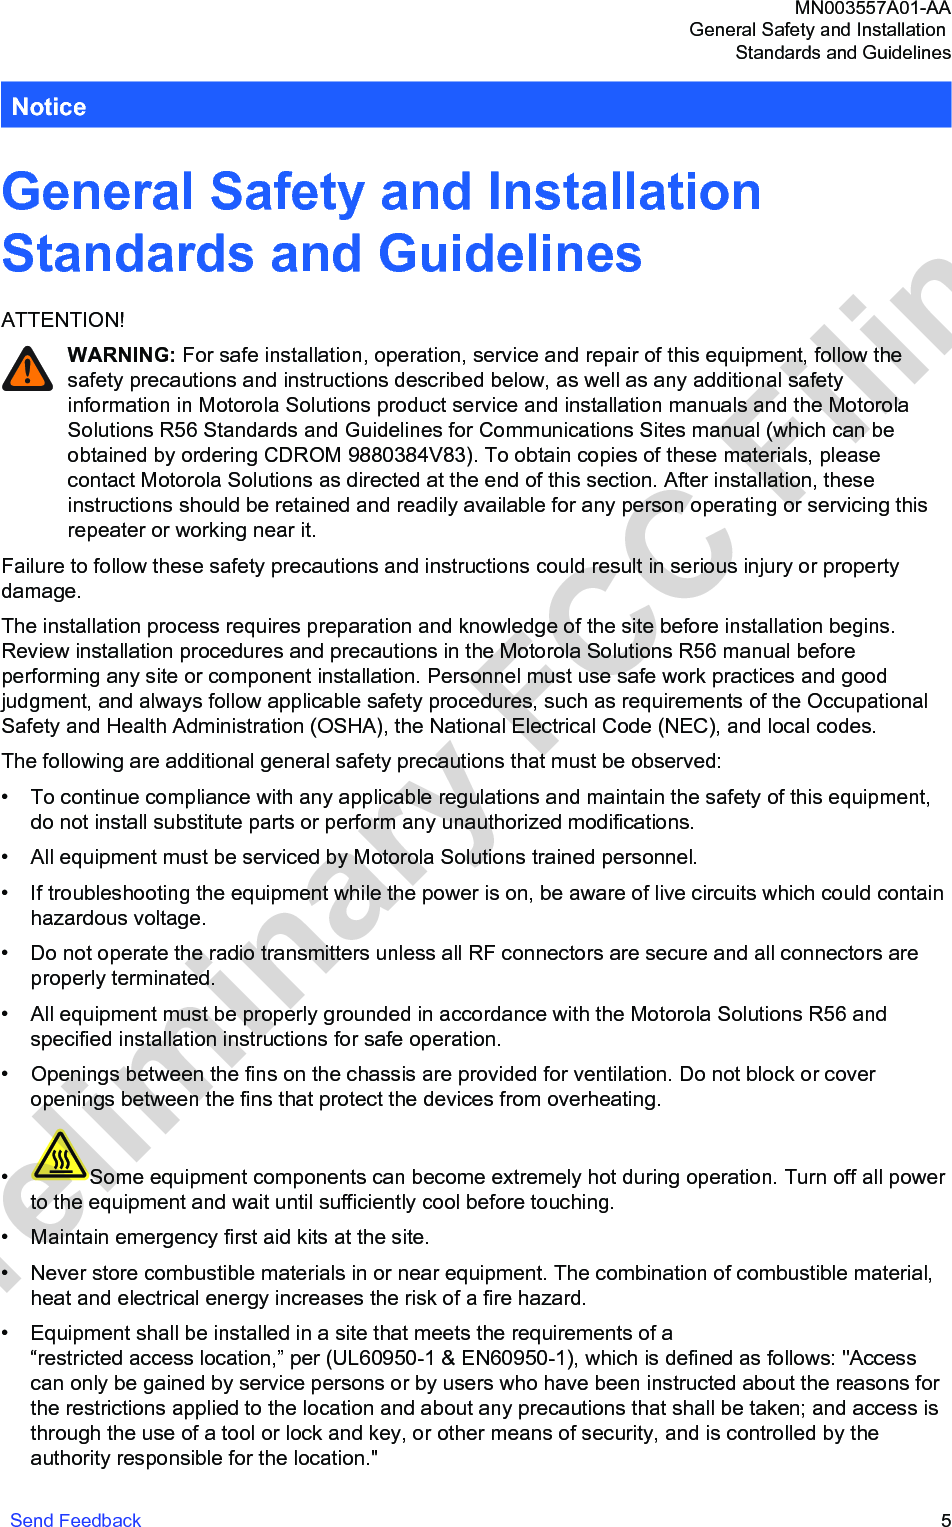 NoticeGeneral Safety and Installation Standards and GuidelinesATTENTION!WARNING: For safe installation, operation, service and repair of this equipment, follow thesafety precautions and instructions described below, as well as any additional safetyinformation in Motorola Solutions product service and installation manuals and the MotorolaSolutions R56 Standards and Guidelines for Communications Sites manual (which can beobtained by ordering CDROM 9880384V83). To obtain copies of these materials, pleasecontact Motorola Solutions as directed at the end of this section. After installation, theseinstructions should be retained and readily available for any person operating or servicing thisrepeater or working near it.Failure to follow these safety precautions and instructions could result in serious injury or propertydamage.The installation process requires preparation and knowledge of the site before installation begins.Review installation procedures and precautions in the Motorola Solutions R56 manual beforeperforming any site or component installation. Personnel must use safe work practices and goodjudgment, and always follow applicable safety procedures, such as requirements of the OccupationalSafety and Health Administration (OSHA), the National Electrical Code (NEC), and local codes.The following are additional general safety precautions that must be observed:• To continue compliance with any applicable regulations and maintain the safety of this equipment,do not install substitute parts or perform any unauthorized modifications.• All equipment must be serviced by Motorola Solutions trained personnel.• If troubleshooting the equipment while the power is on, be aware of live circuits which could containhazardous voltage.• Do not operate the radio transmitters unless all RF connectors are secure and all connectors areproperly terminated.• All equipment must be properly grounded in accordance with the Motorola Solutions R56 andspecified installation instructions for safe operation.• Openings between the fins on the chassis are provided for ventilation. Do not block or coveropenings between the fins that protect the devices from overheating.•Some equipment components can become extremely hot during operation. Turn off all powerto the equipment and wait until sufficiently cool before touching.•Maintain emergency first aid kits at the site.• Never store combustible materials in or near equipment. The combination of combustible material,heat and electrical energy increases the risk of a fire hazard.• Equipment shall be installed in a site that meets the requirements of a “restricted access location,” per (UL60950-1 &amp; EN60950-1), which is defined as follows: &quot;Accesscan only be gained by service persons or by users who have been instructed about the reasons forthe restrictions applied to the location and about any precautions that shall be taken; and access isthrough the use of a tool or lock and key, or other means of security, and is controlled by theauthority responsible for the location.&quot;MN003557A01-AAGeneral Safety and Installation Standards and GuidelinesSend Feedback   5Preliminary FCC Filing